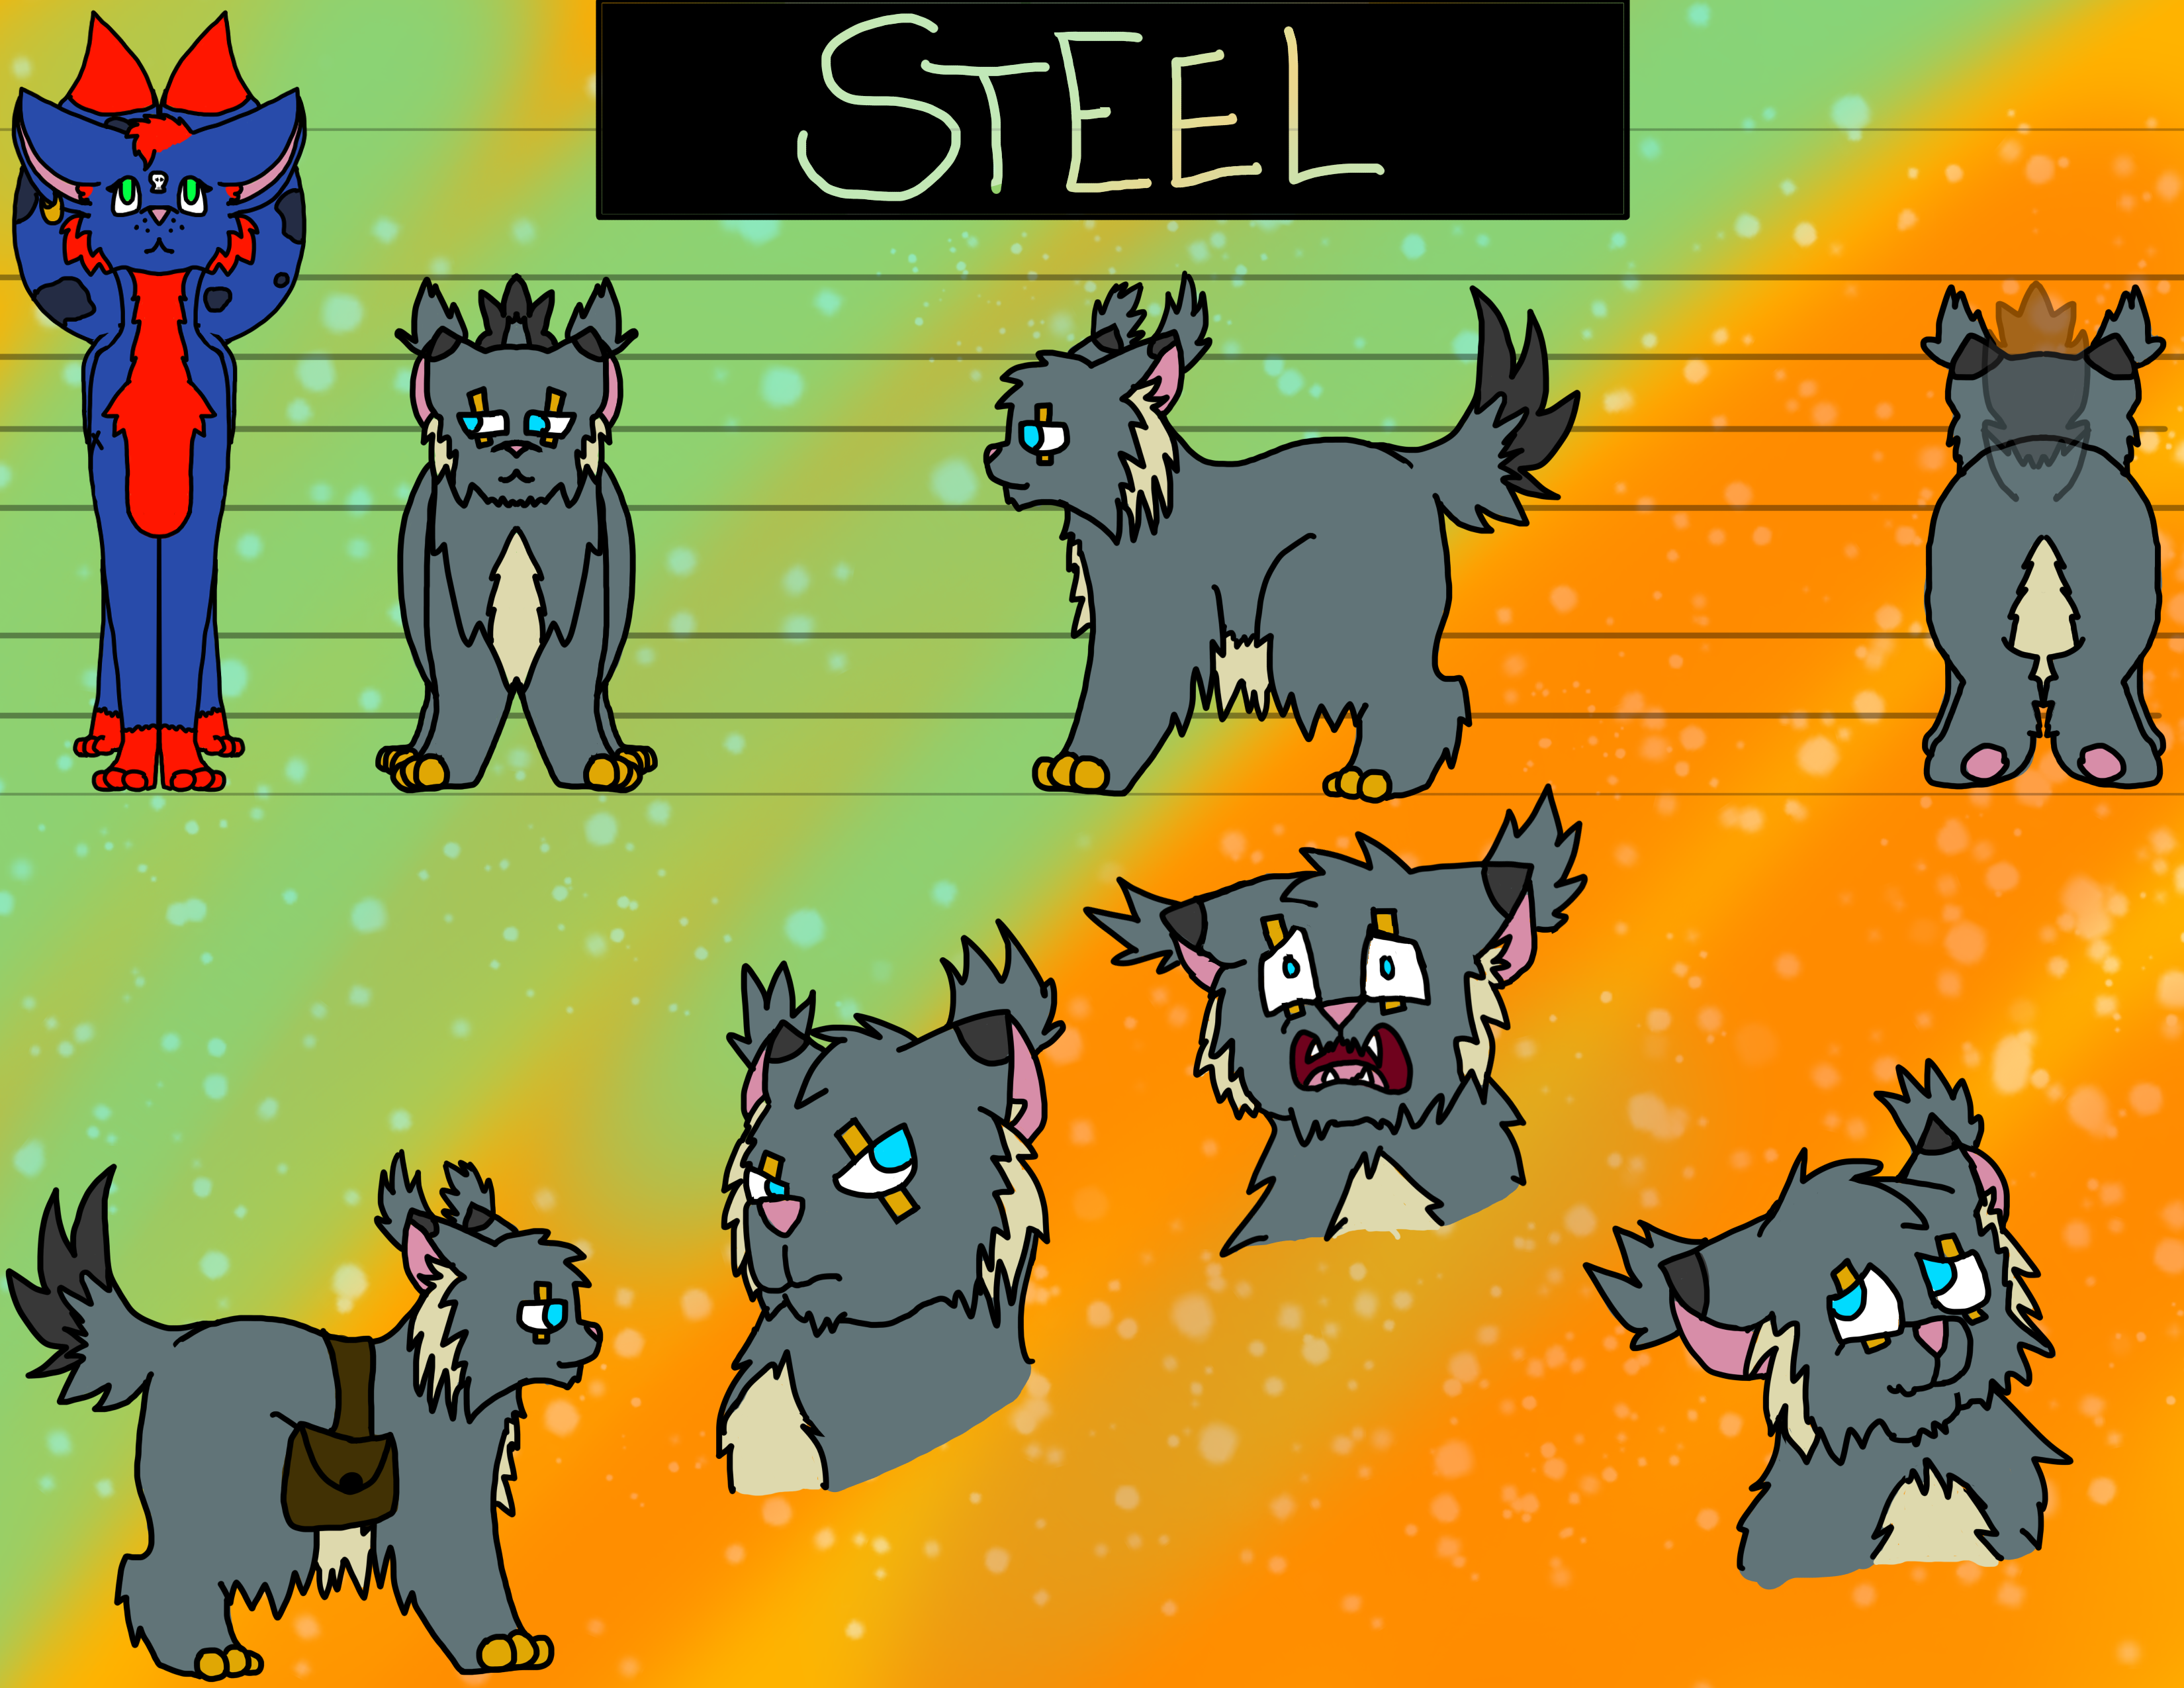 Character Sheet of a fluffy grey cat with a cream colored belly and tufts of fur on their ears